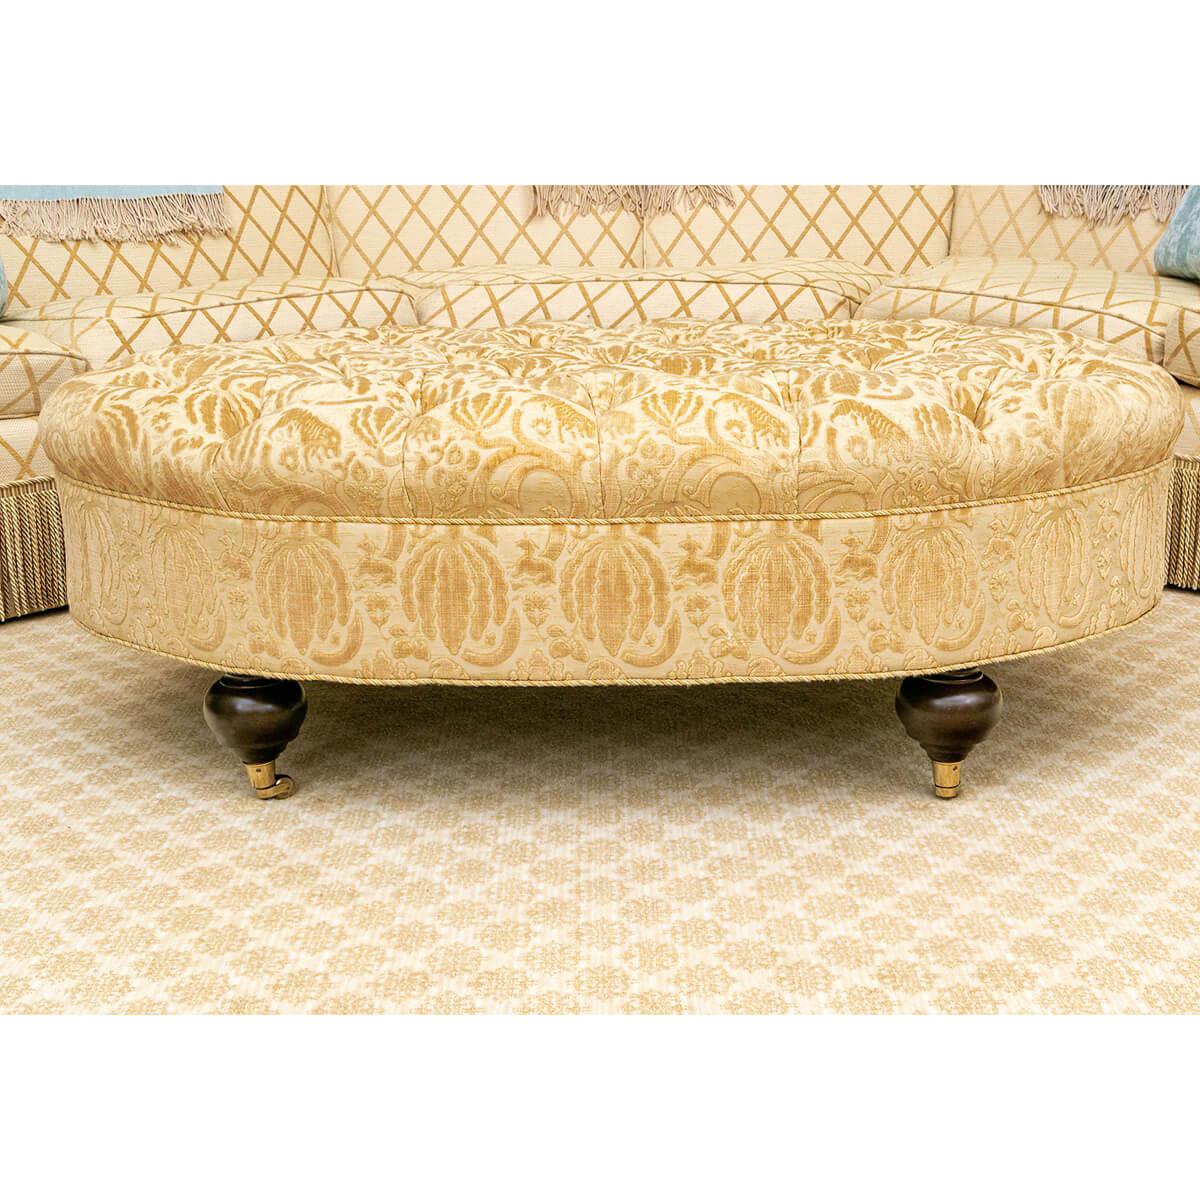 American Classical Large Oval Ottoman